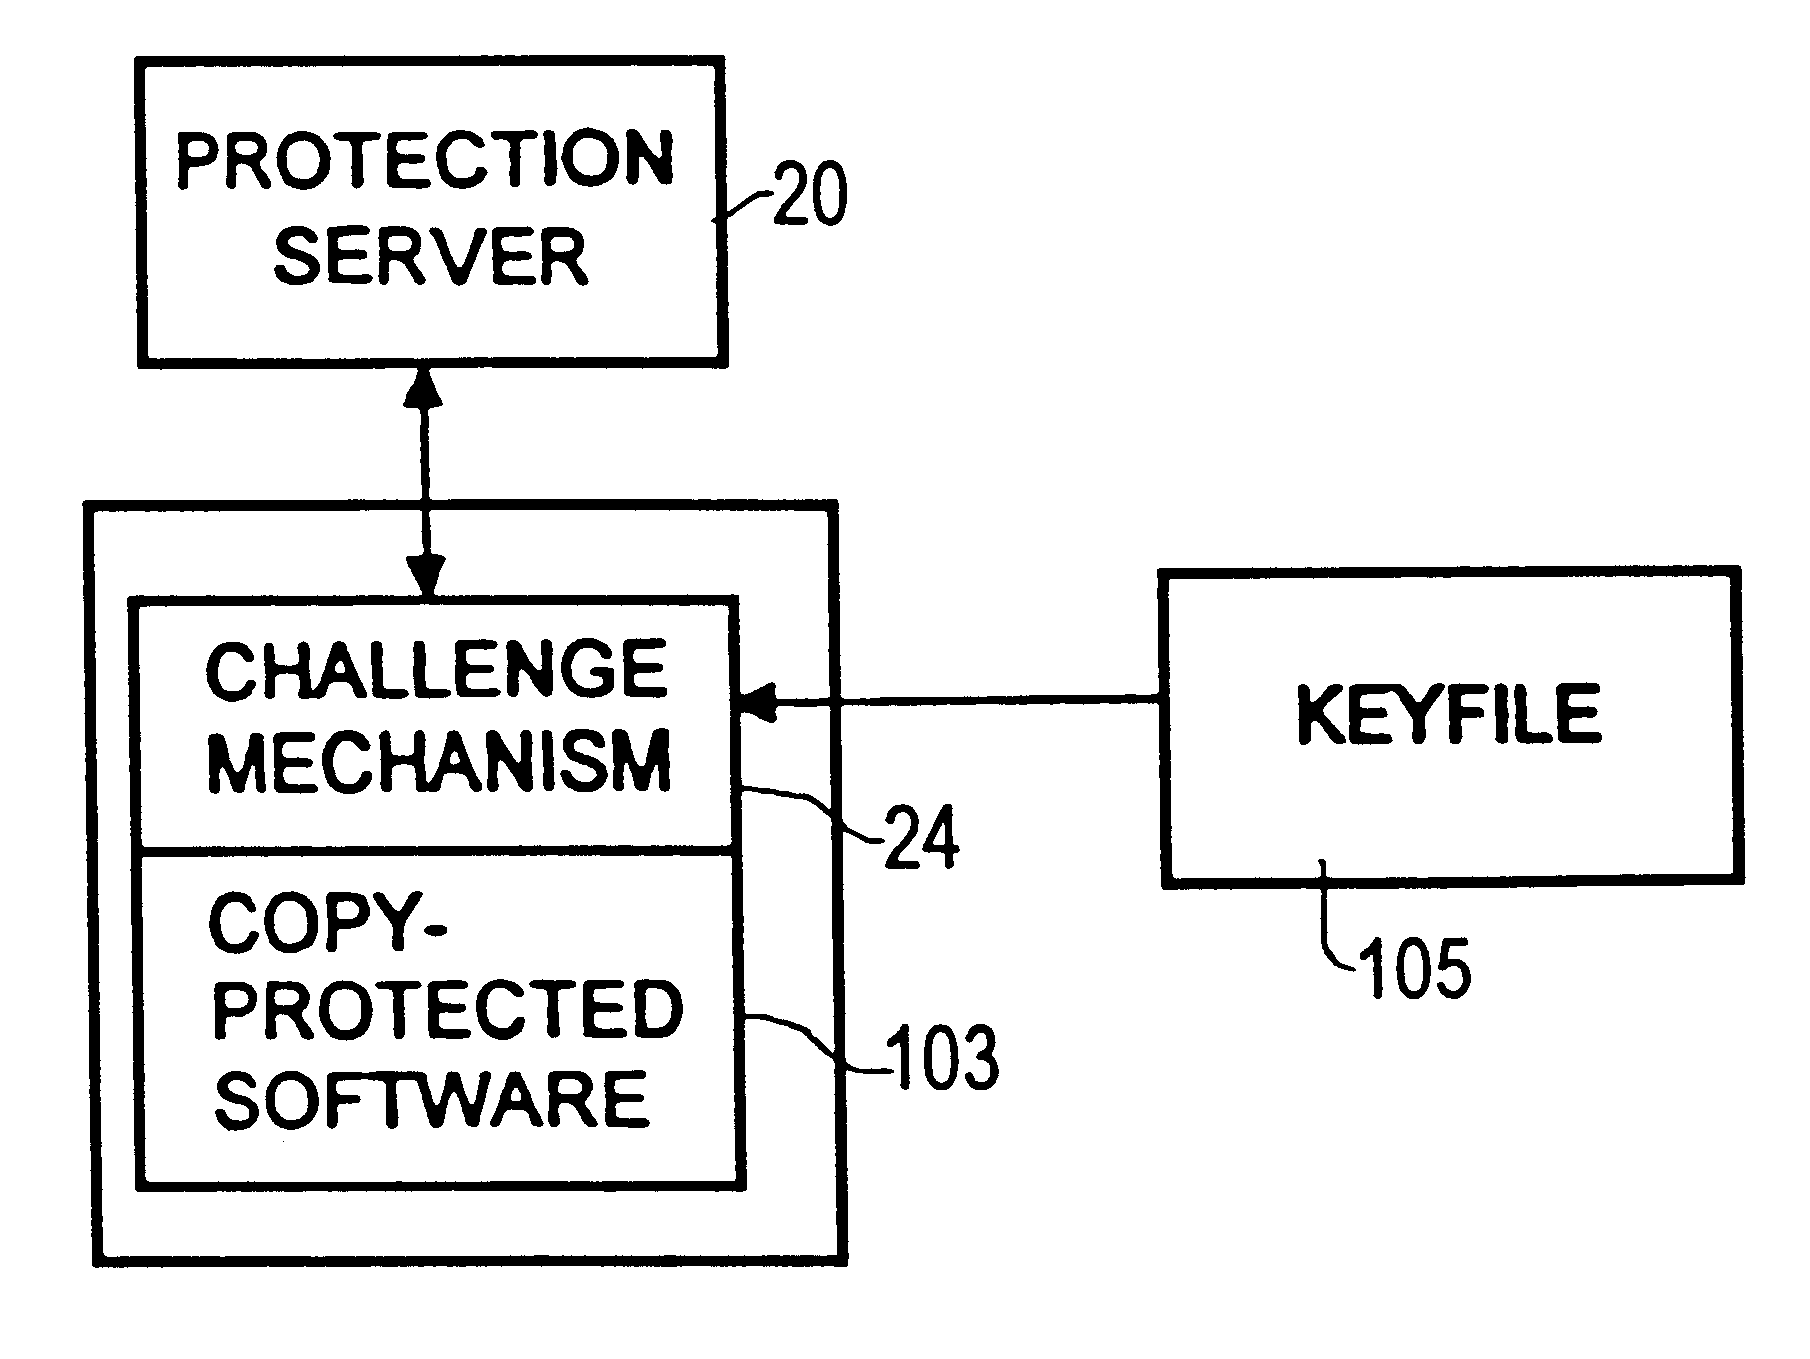 Protection of software using a challenge-response protocol embedded in the software